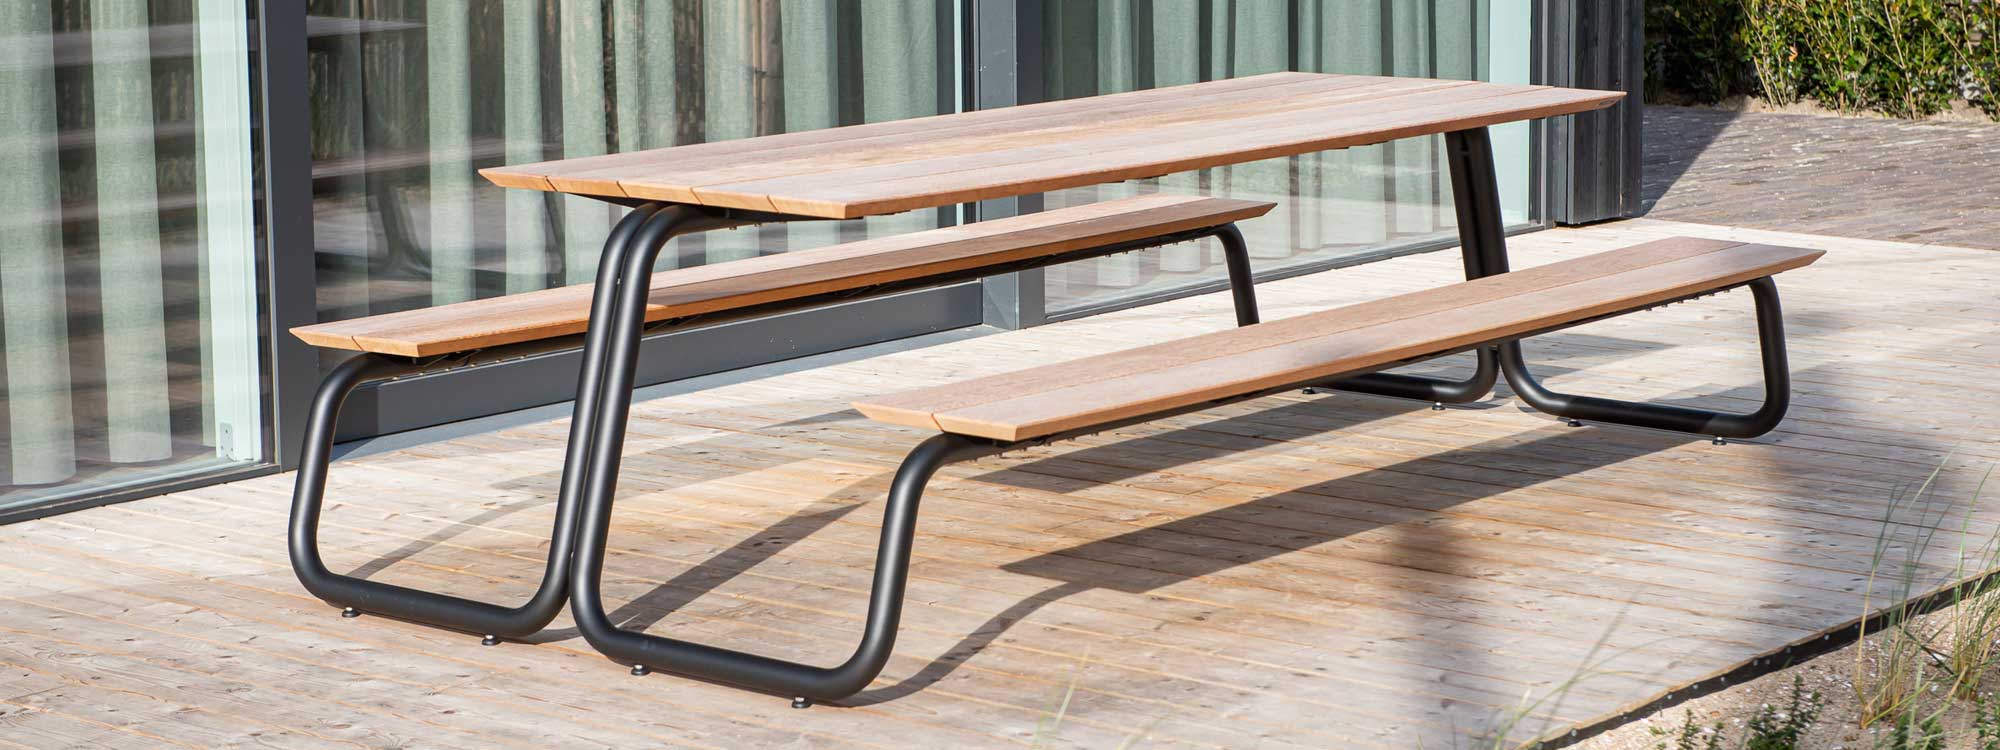 Image of The Table dark-grey picnic table and benches with tops in sustainable afzelia hardwood by Wünder, Belgium